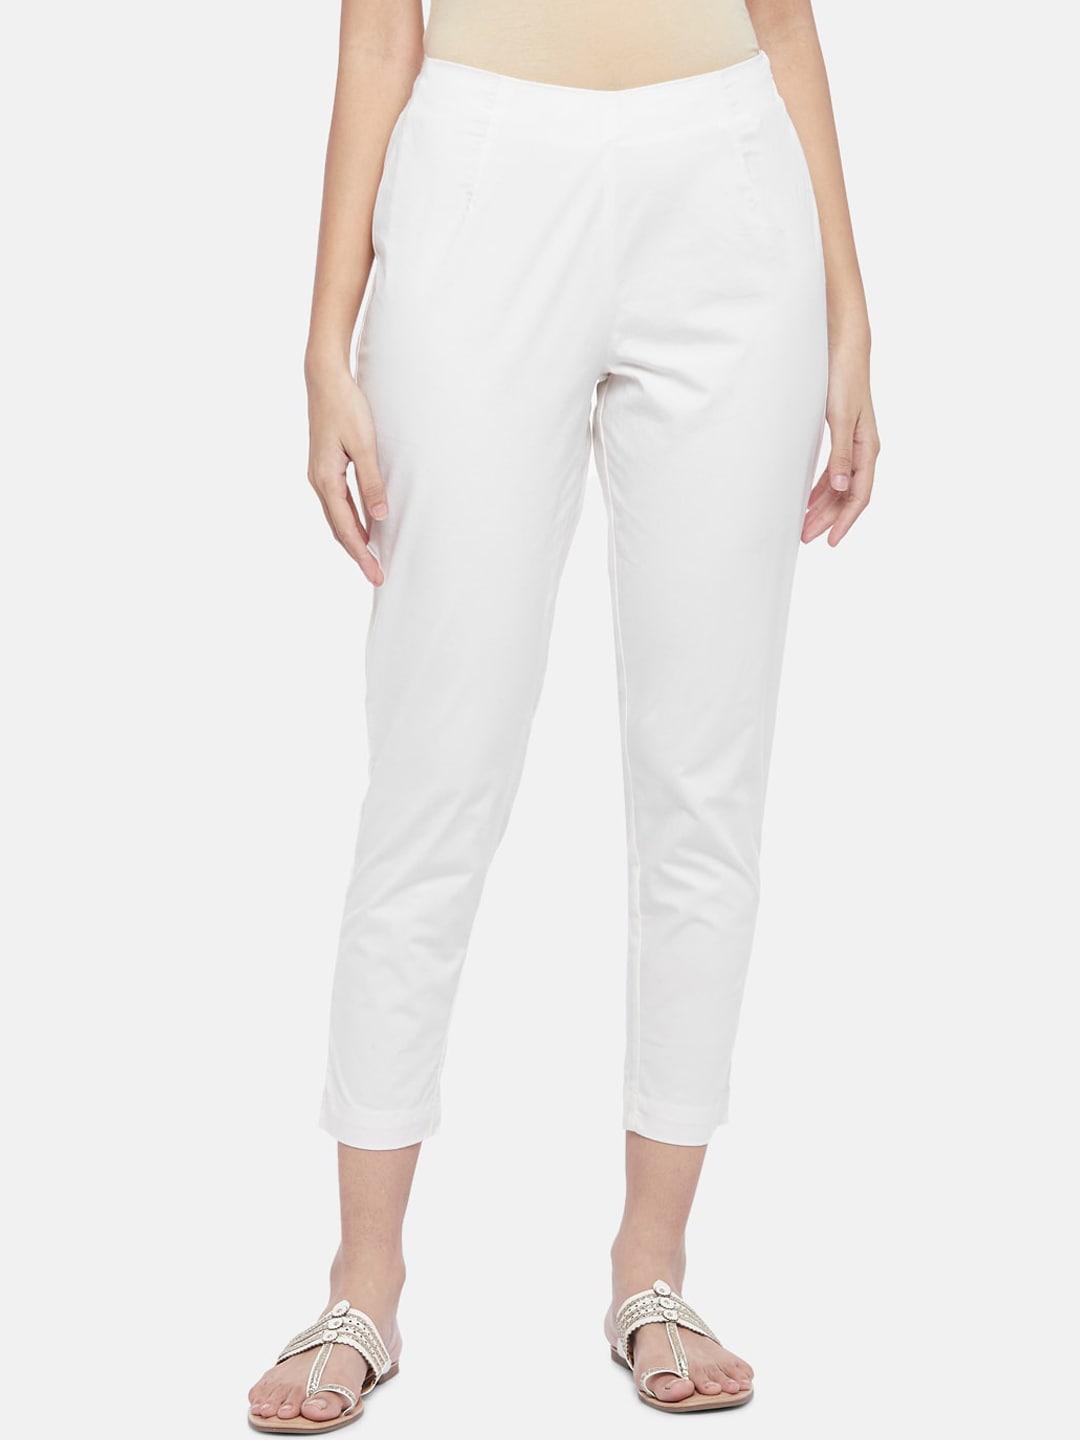 RANGMANCH BY PANTALOONS Women Off White Solid Pure Cotton Culottes Trousers